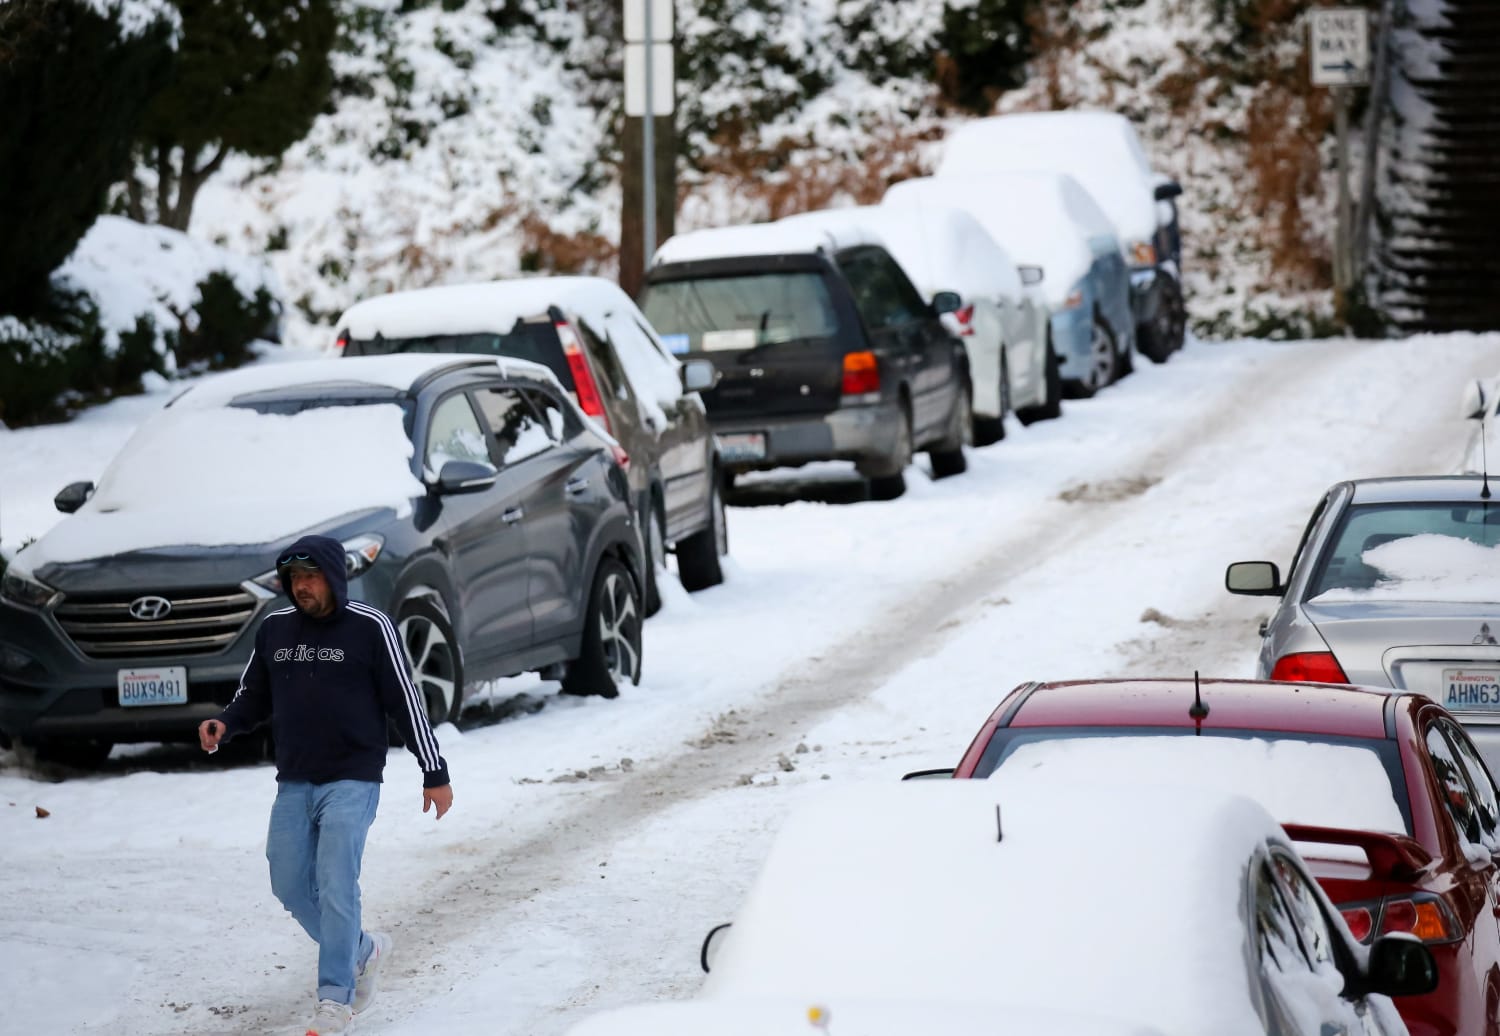 More snow in forecast for Northwest before warmer temperatures return